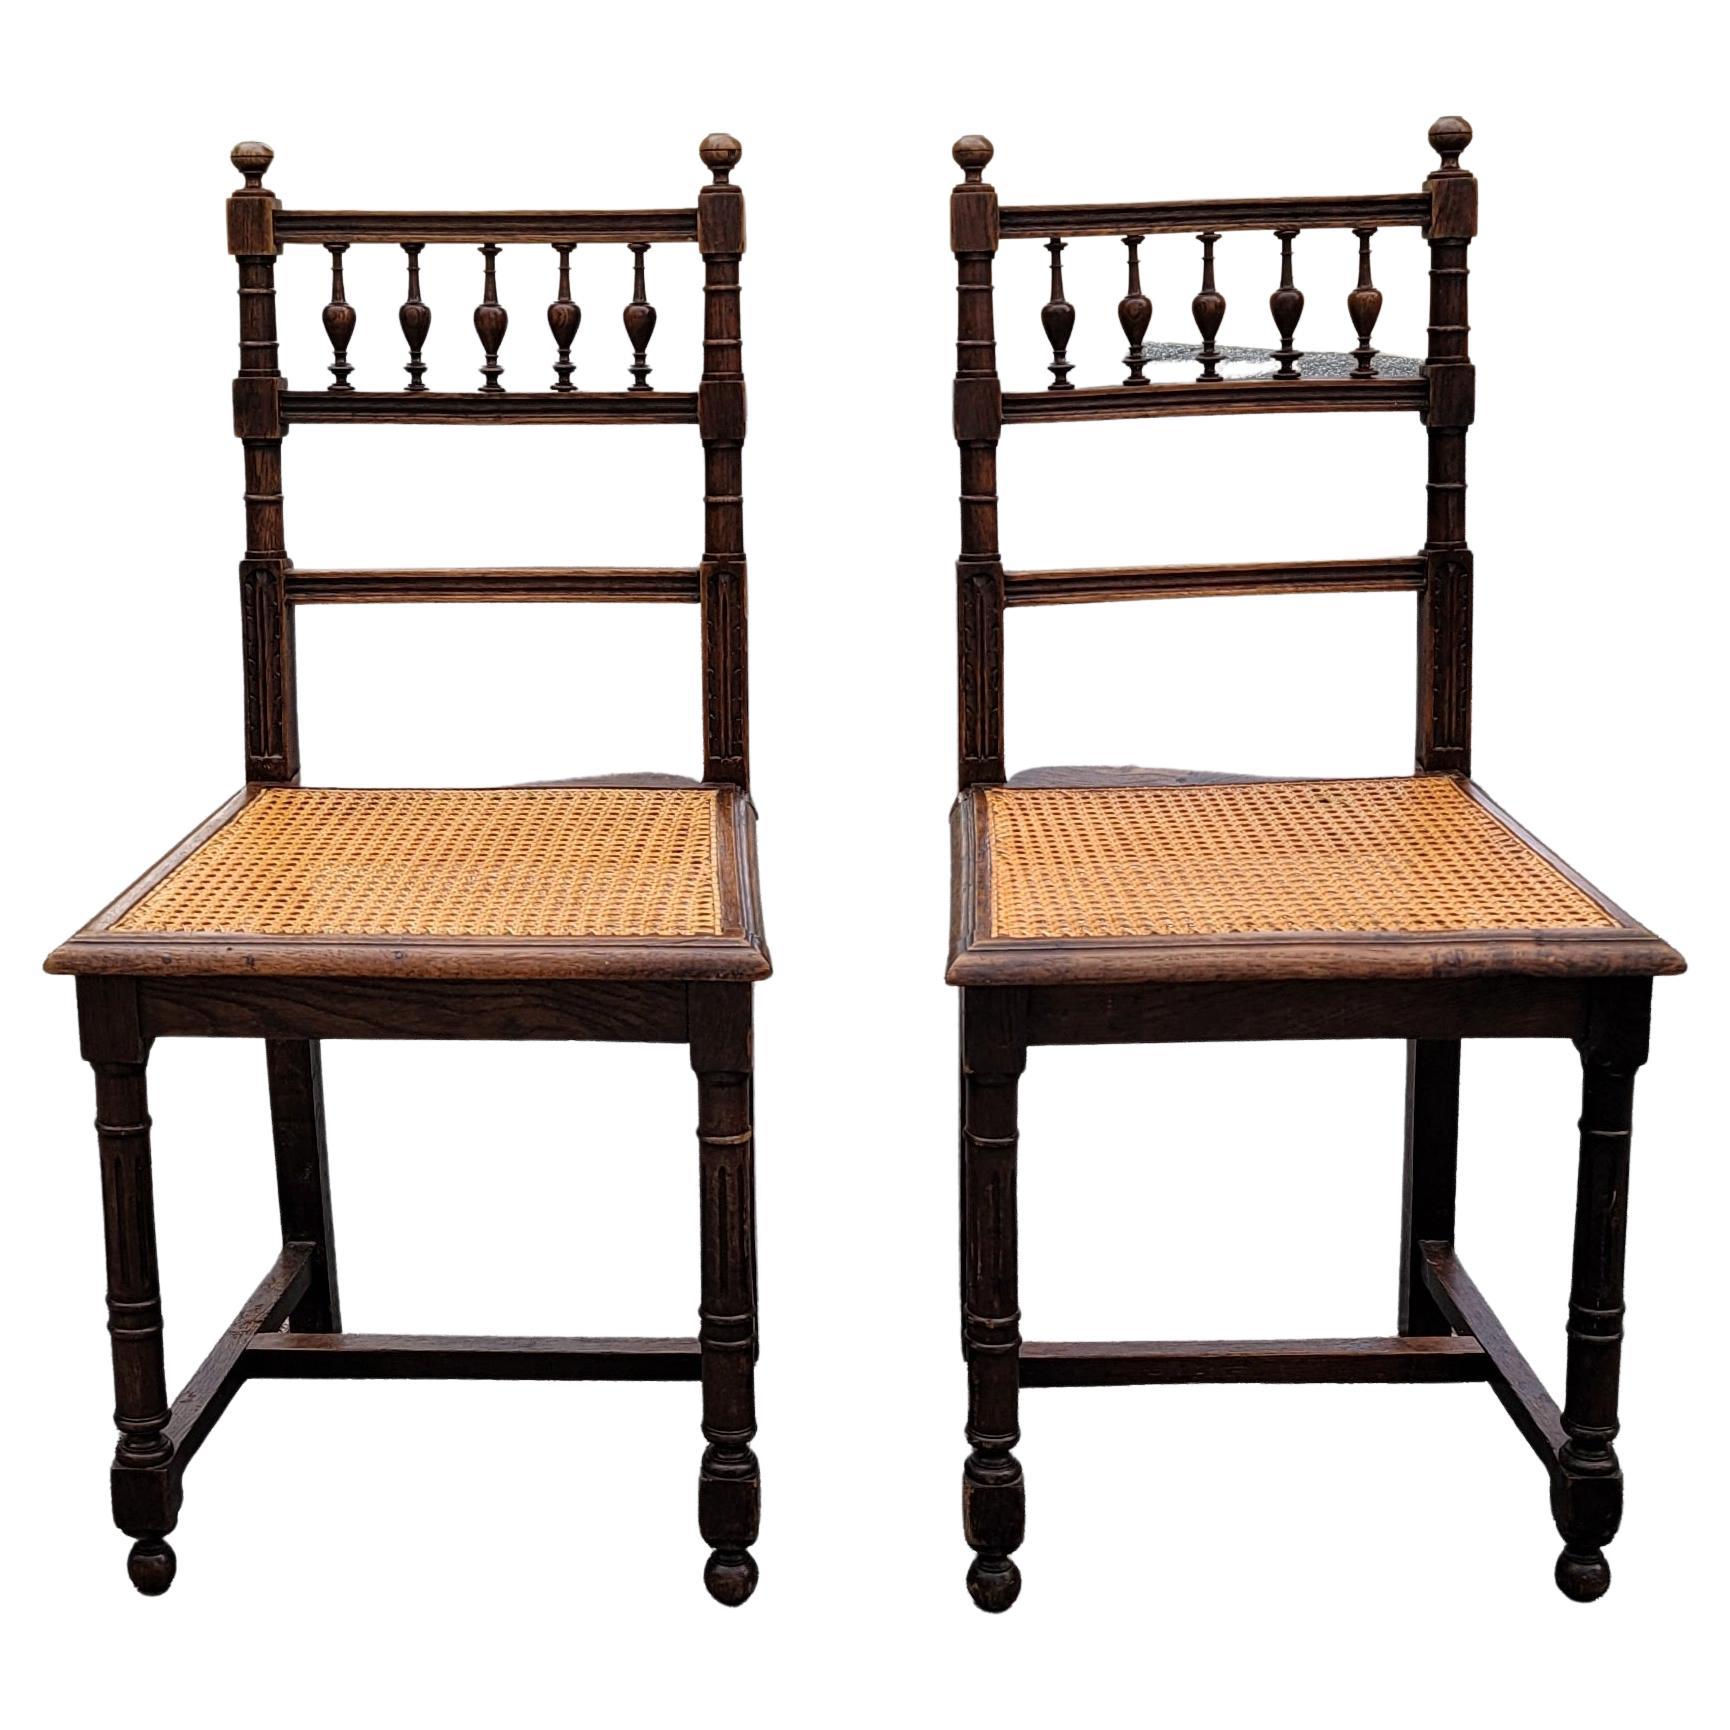 Caning Set of 5 Early 20th C. French Henry II Oak and Canned Seat Dining Chairs For Sale